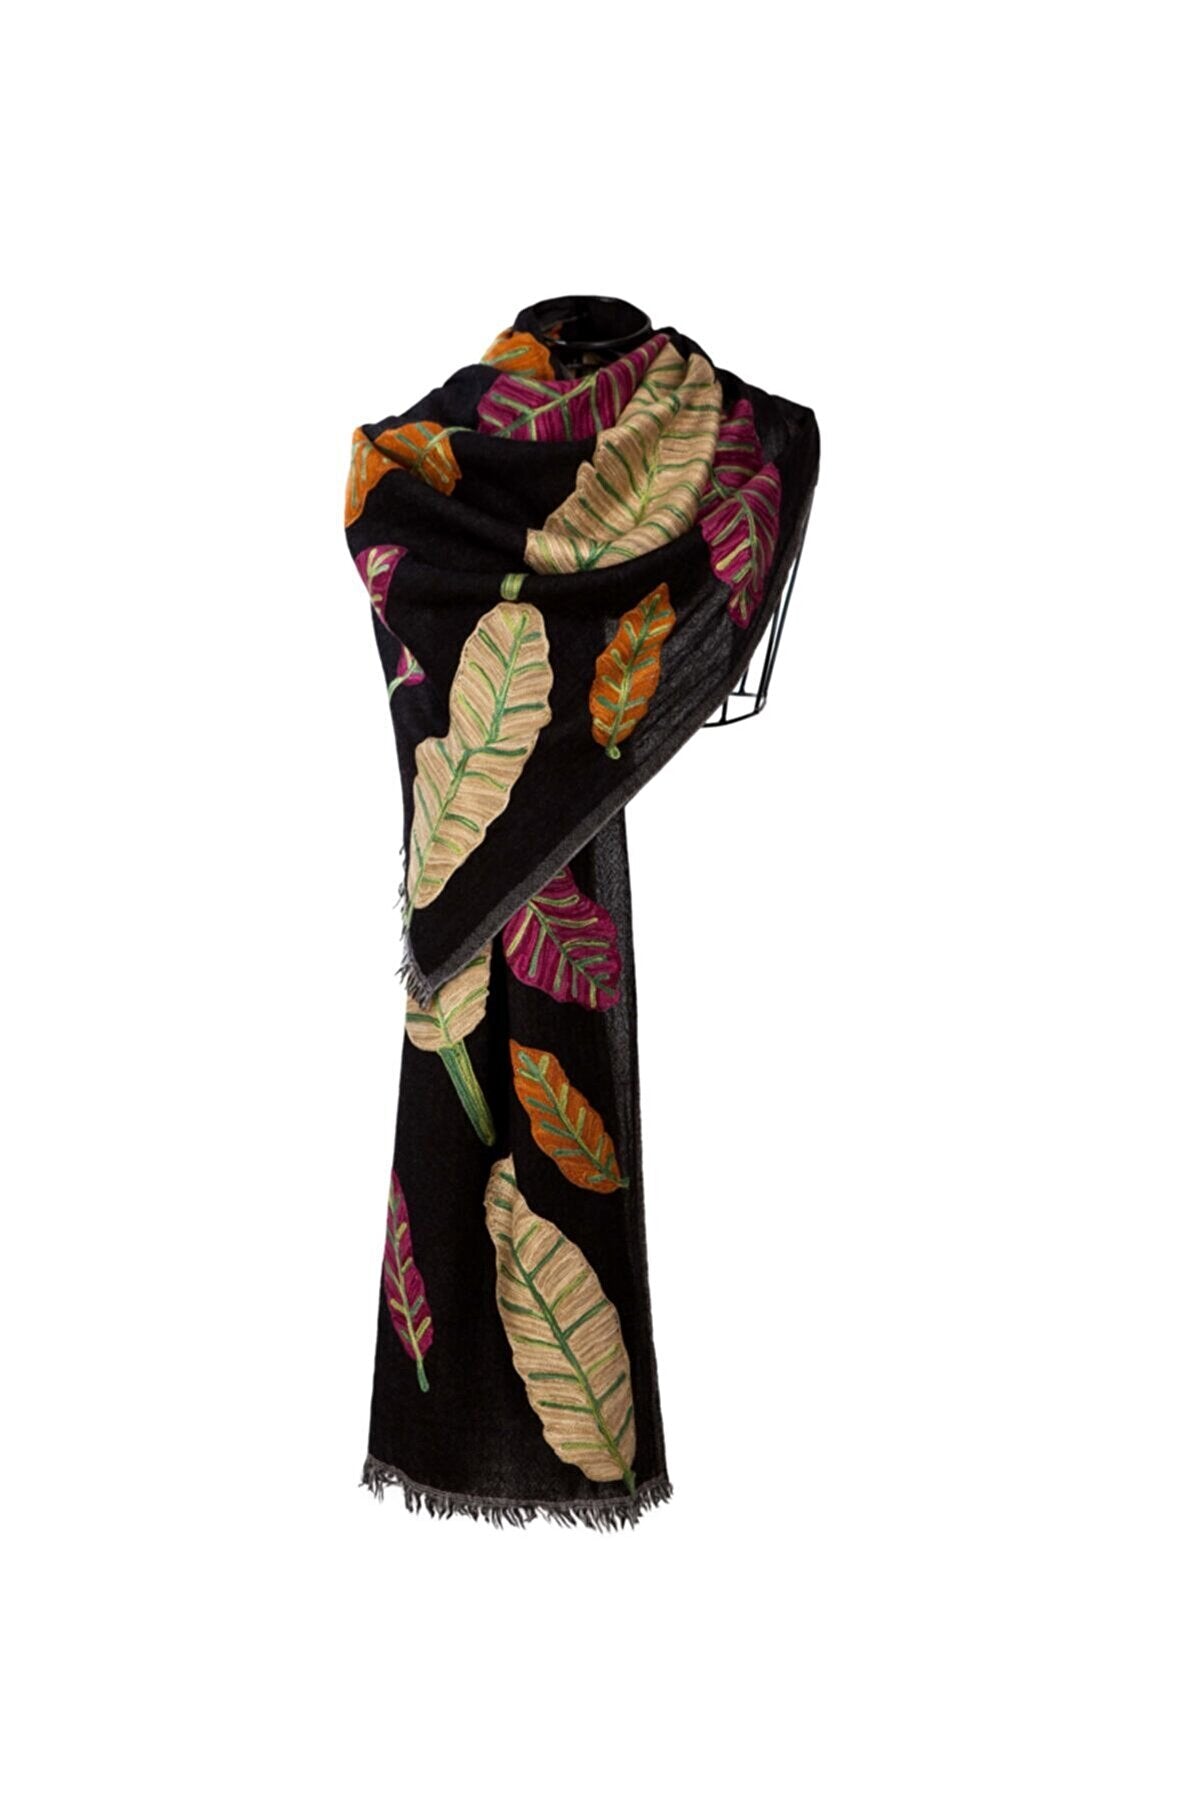 Embroidered Leaves Wool Shawl - Black